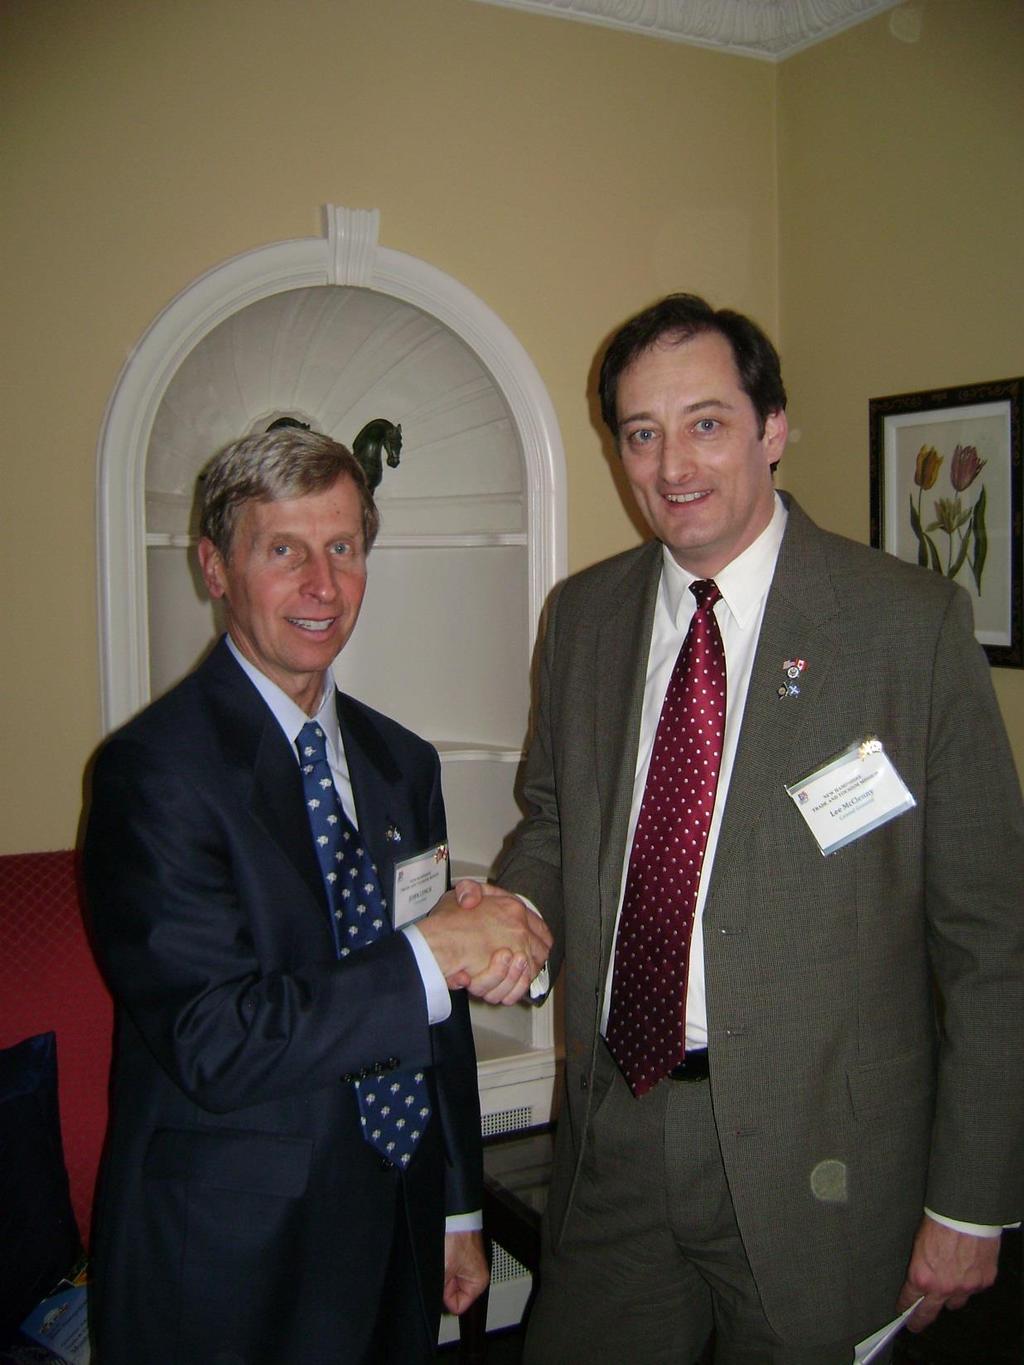 Governor John Lynch and the US Ambassador to Canada at a